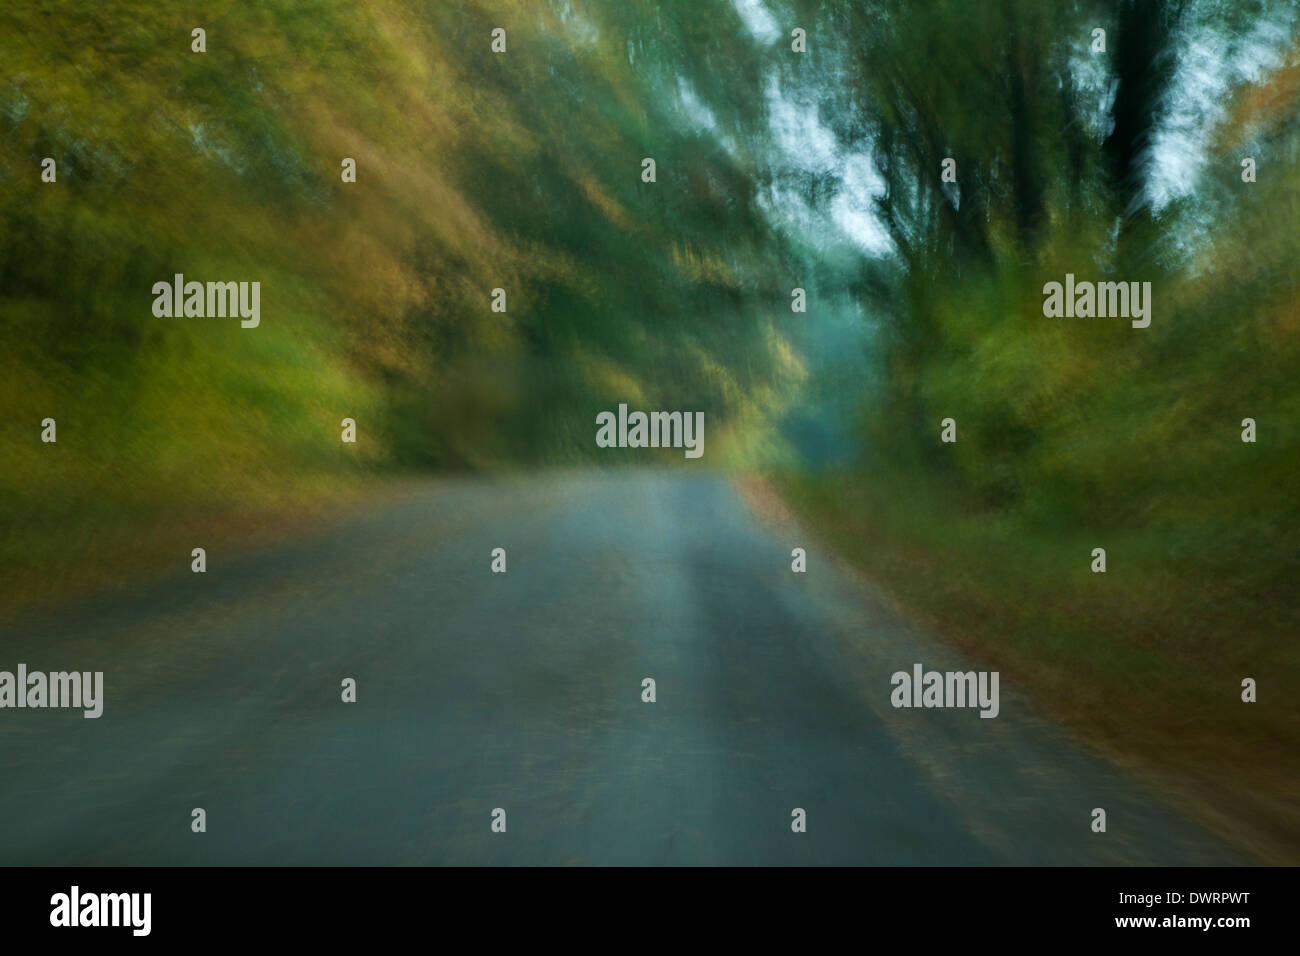 Abstract of a blurred road in trees on a rainy day Stock Photo